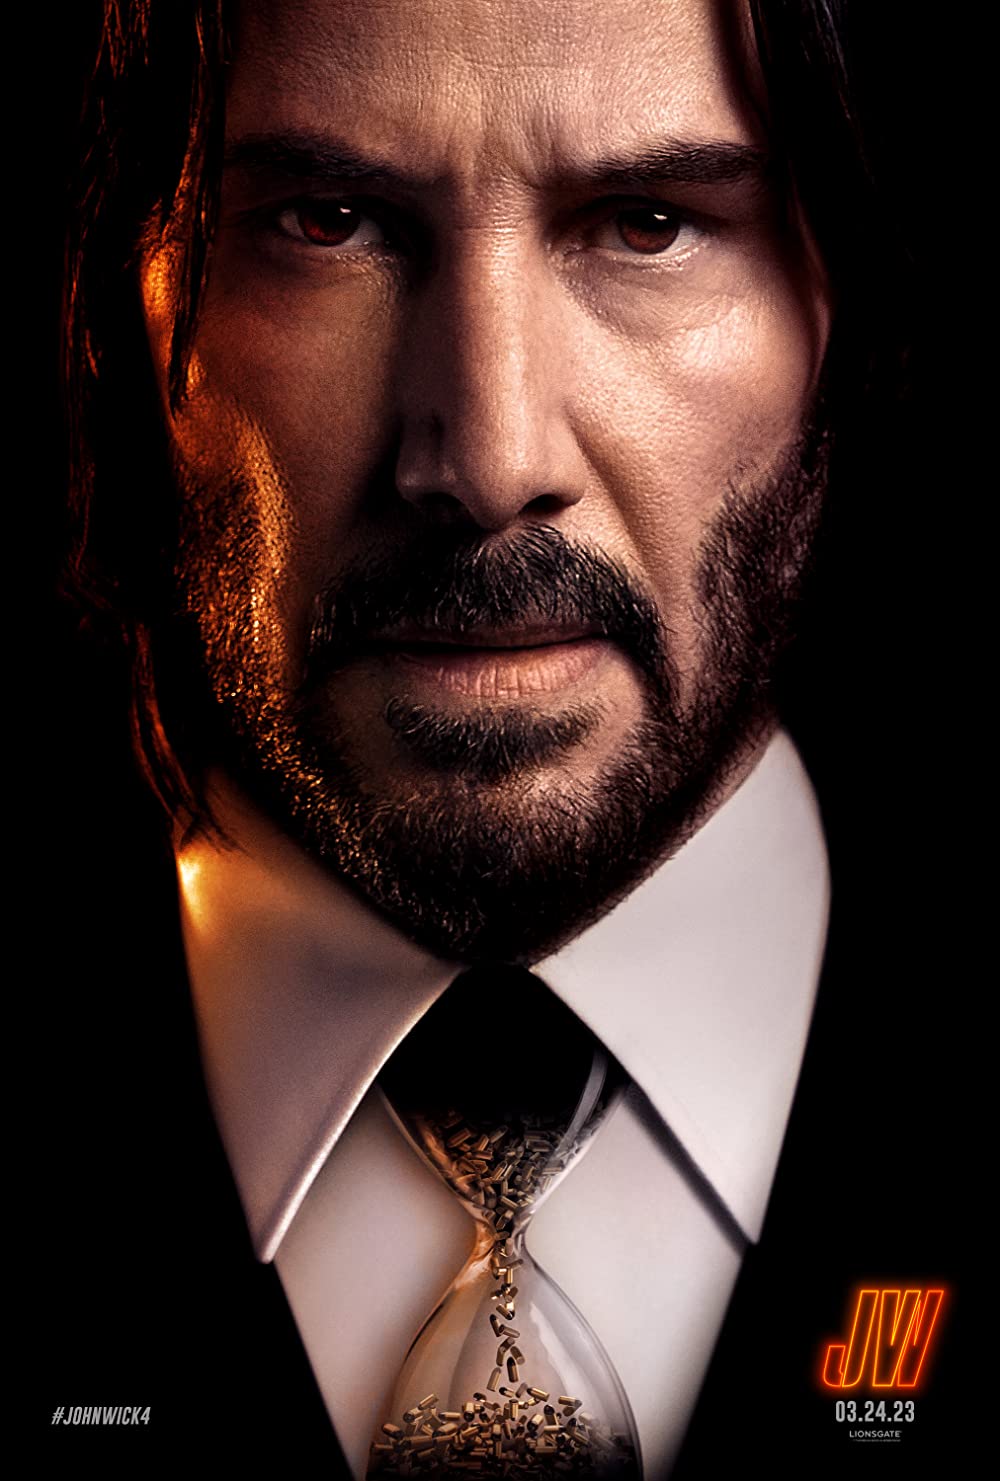 9 best movies like John Wick on Netflix, Max, Hulu, Prime Video and more